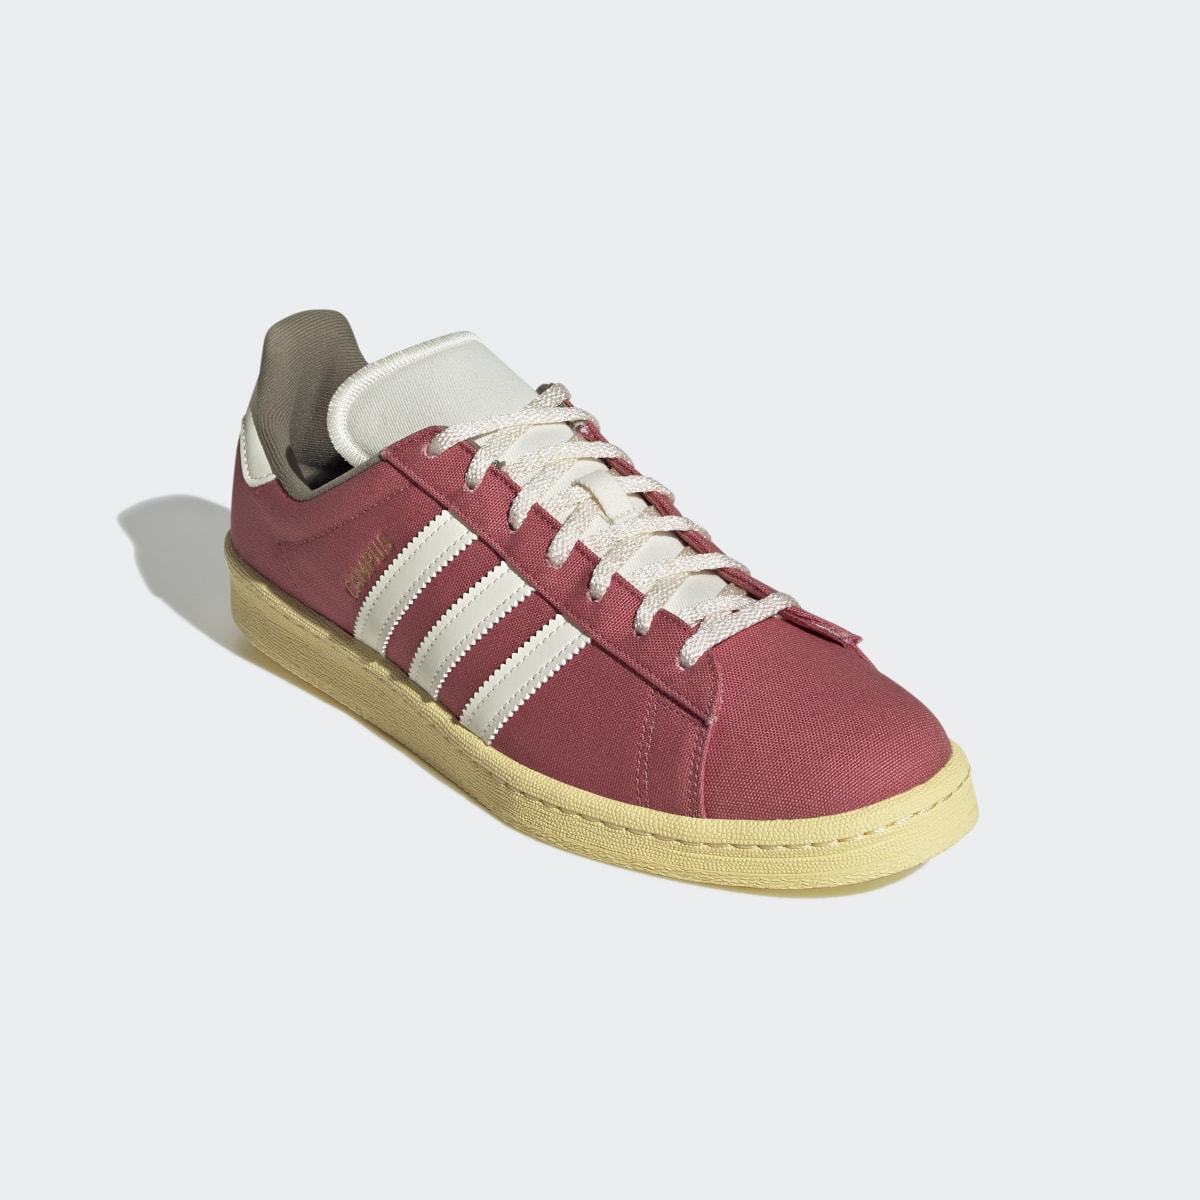 Adidas Campus 80s Shoes. 5